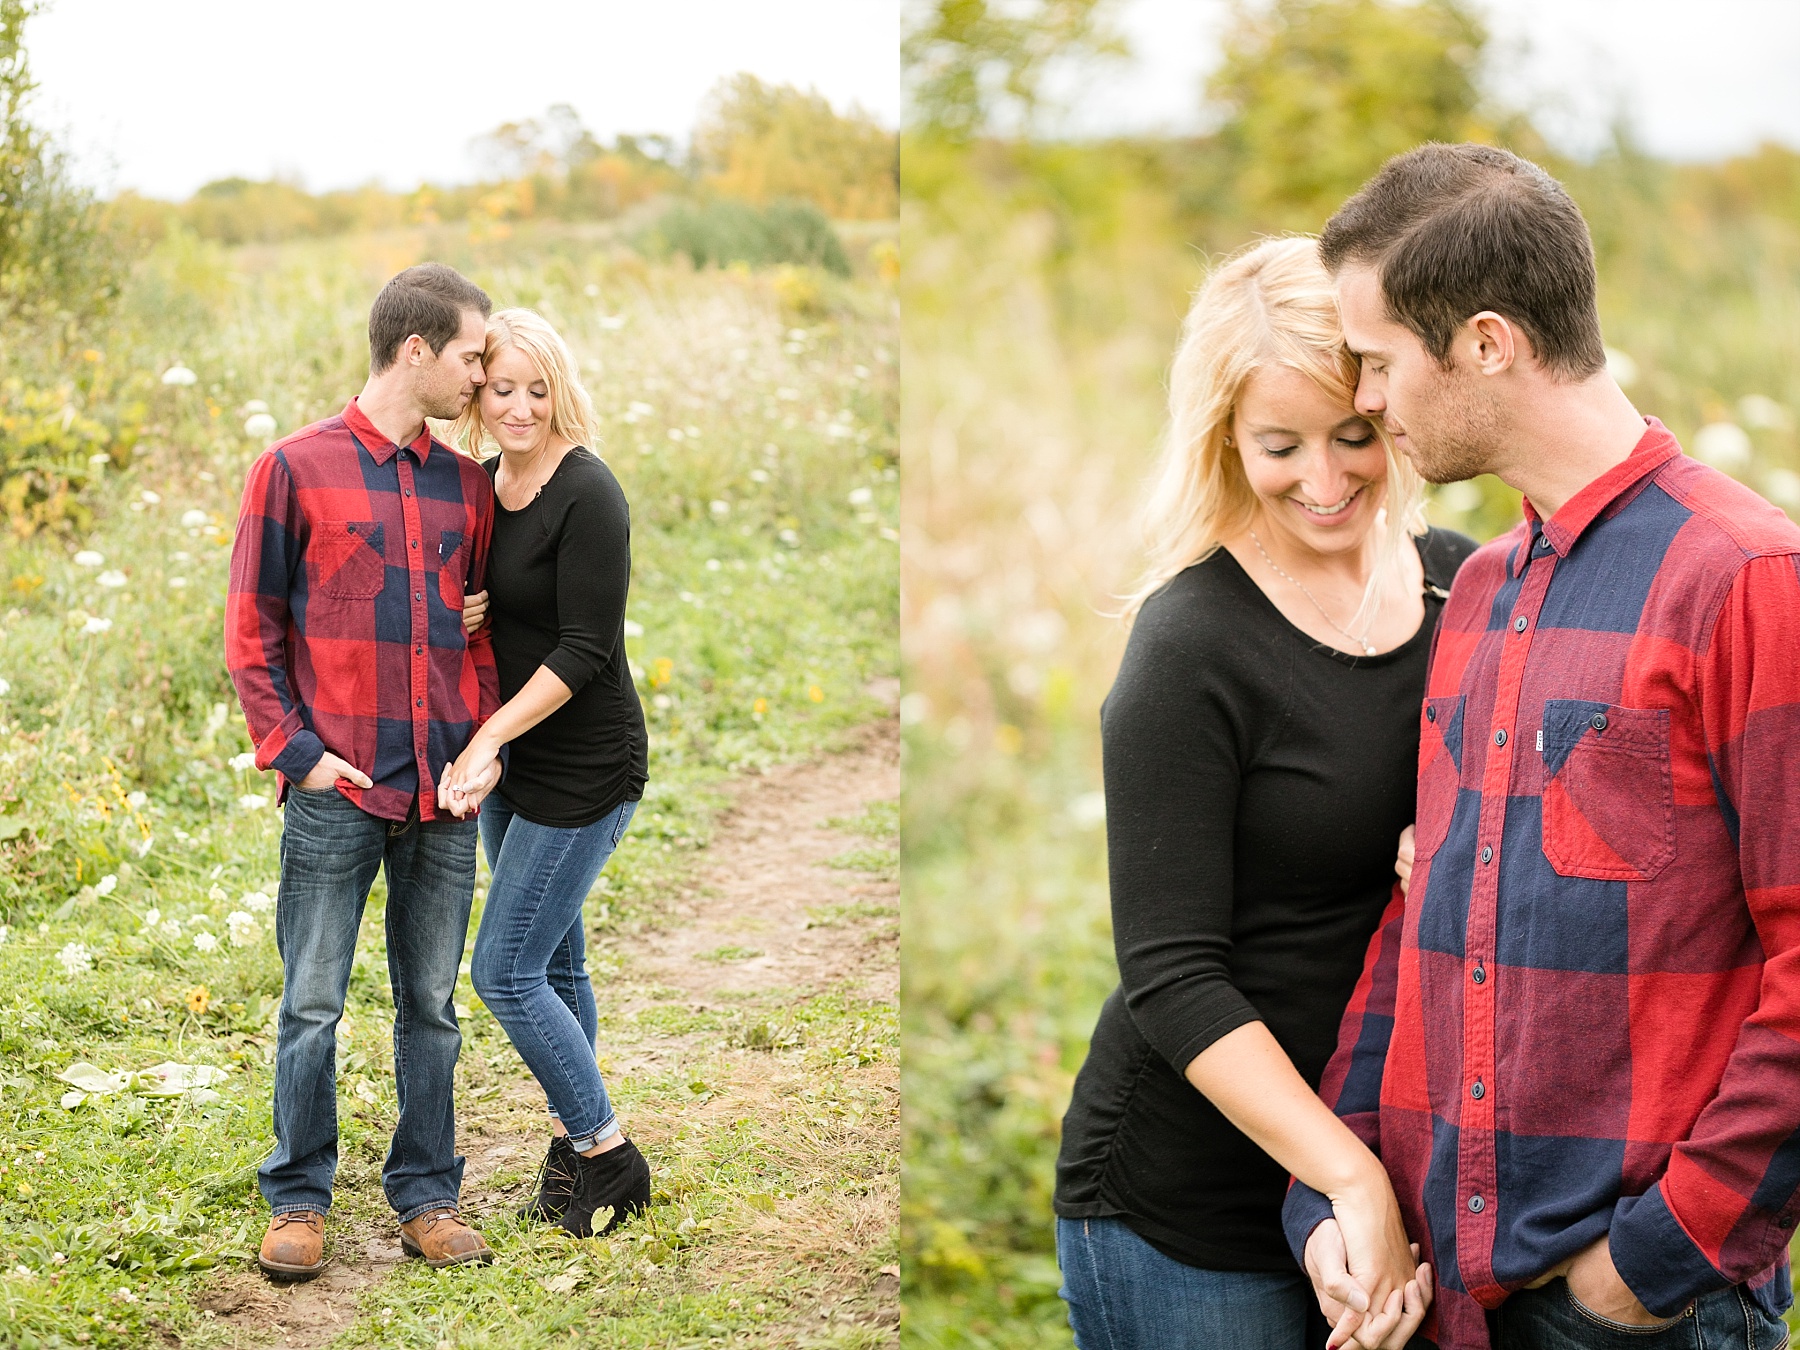 Just as summer turns to fall we explored a hidden spot just outside of town for Nora & Cory's LaCrosse engagement photos on the bluffs.